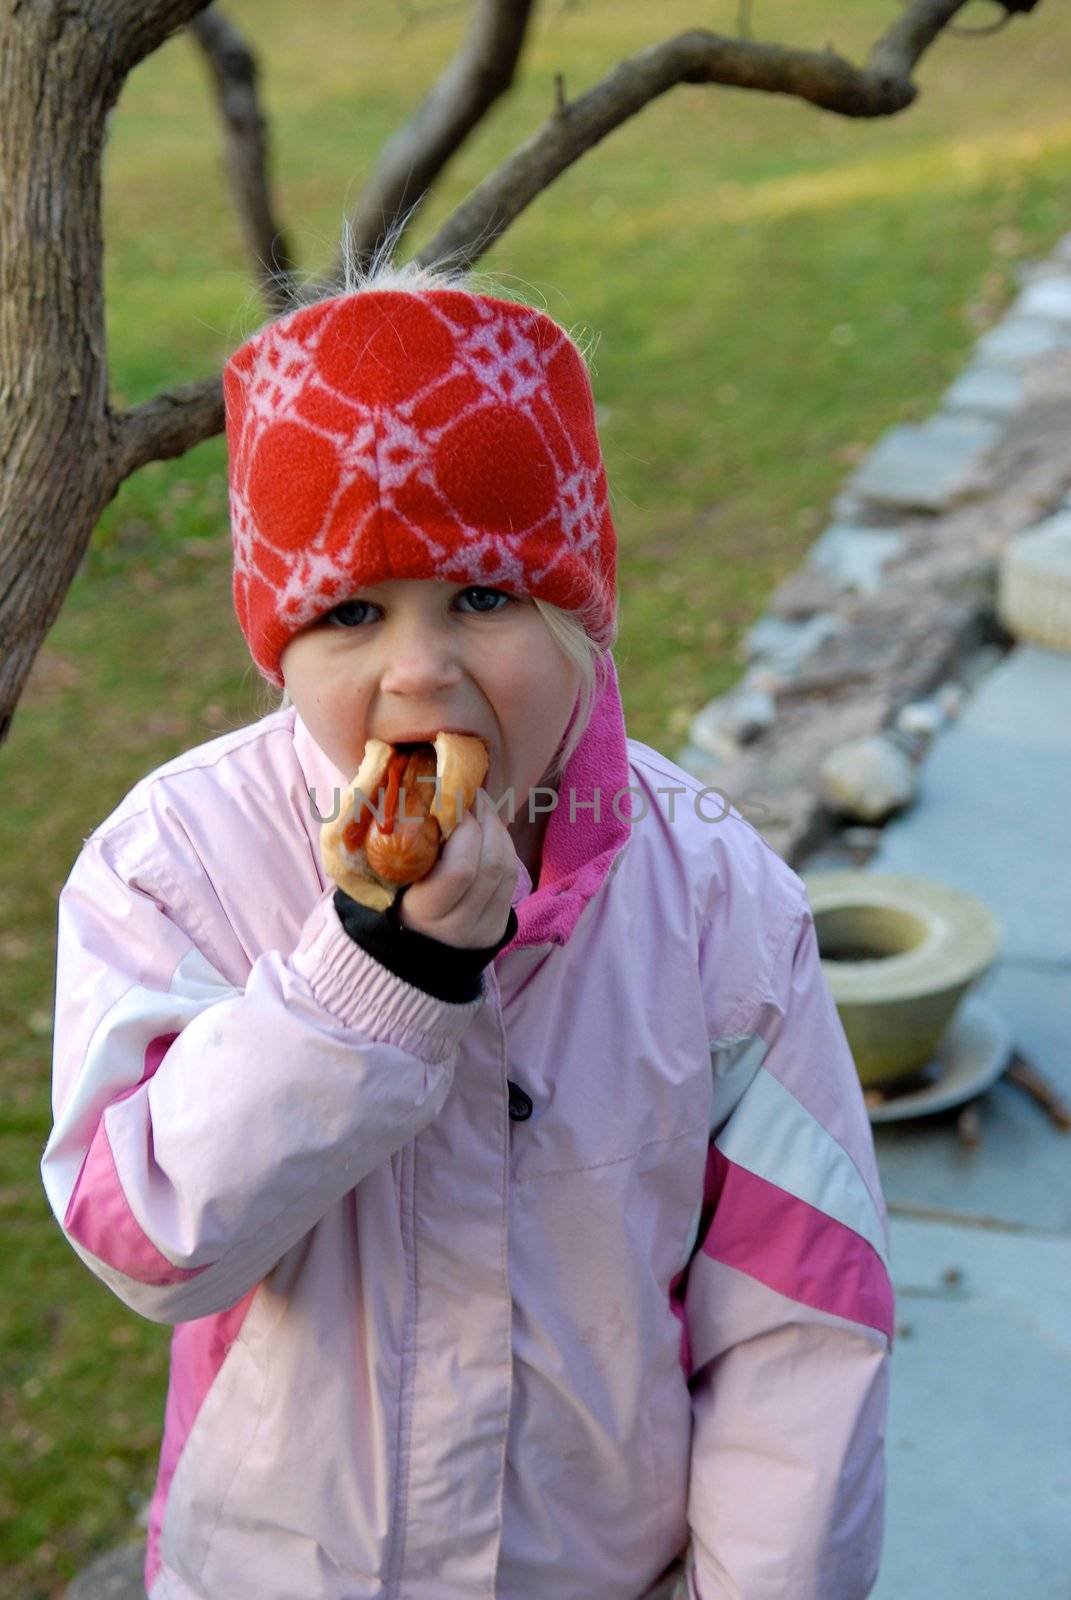 girl eating the hot dog. Please note: No negative use allowed.